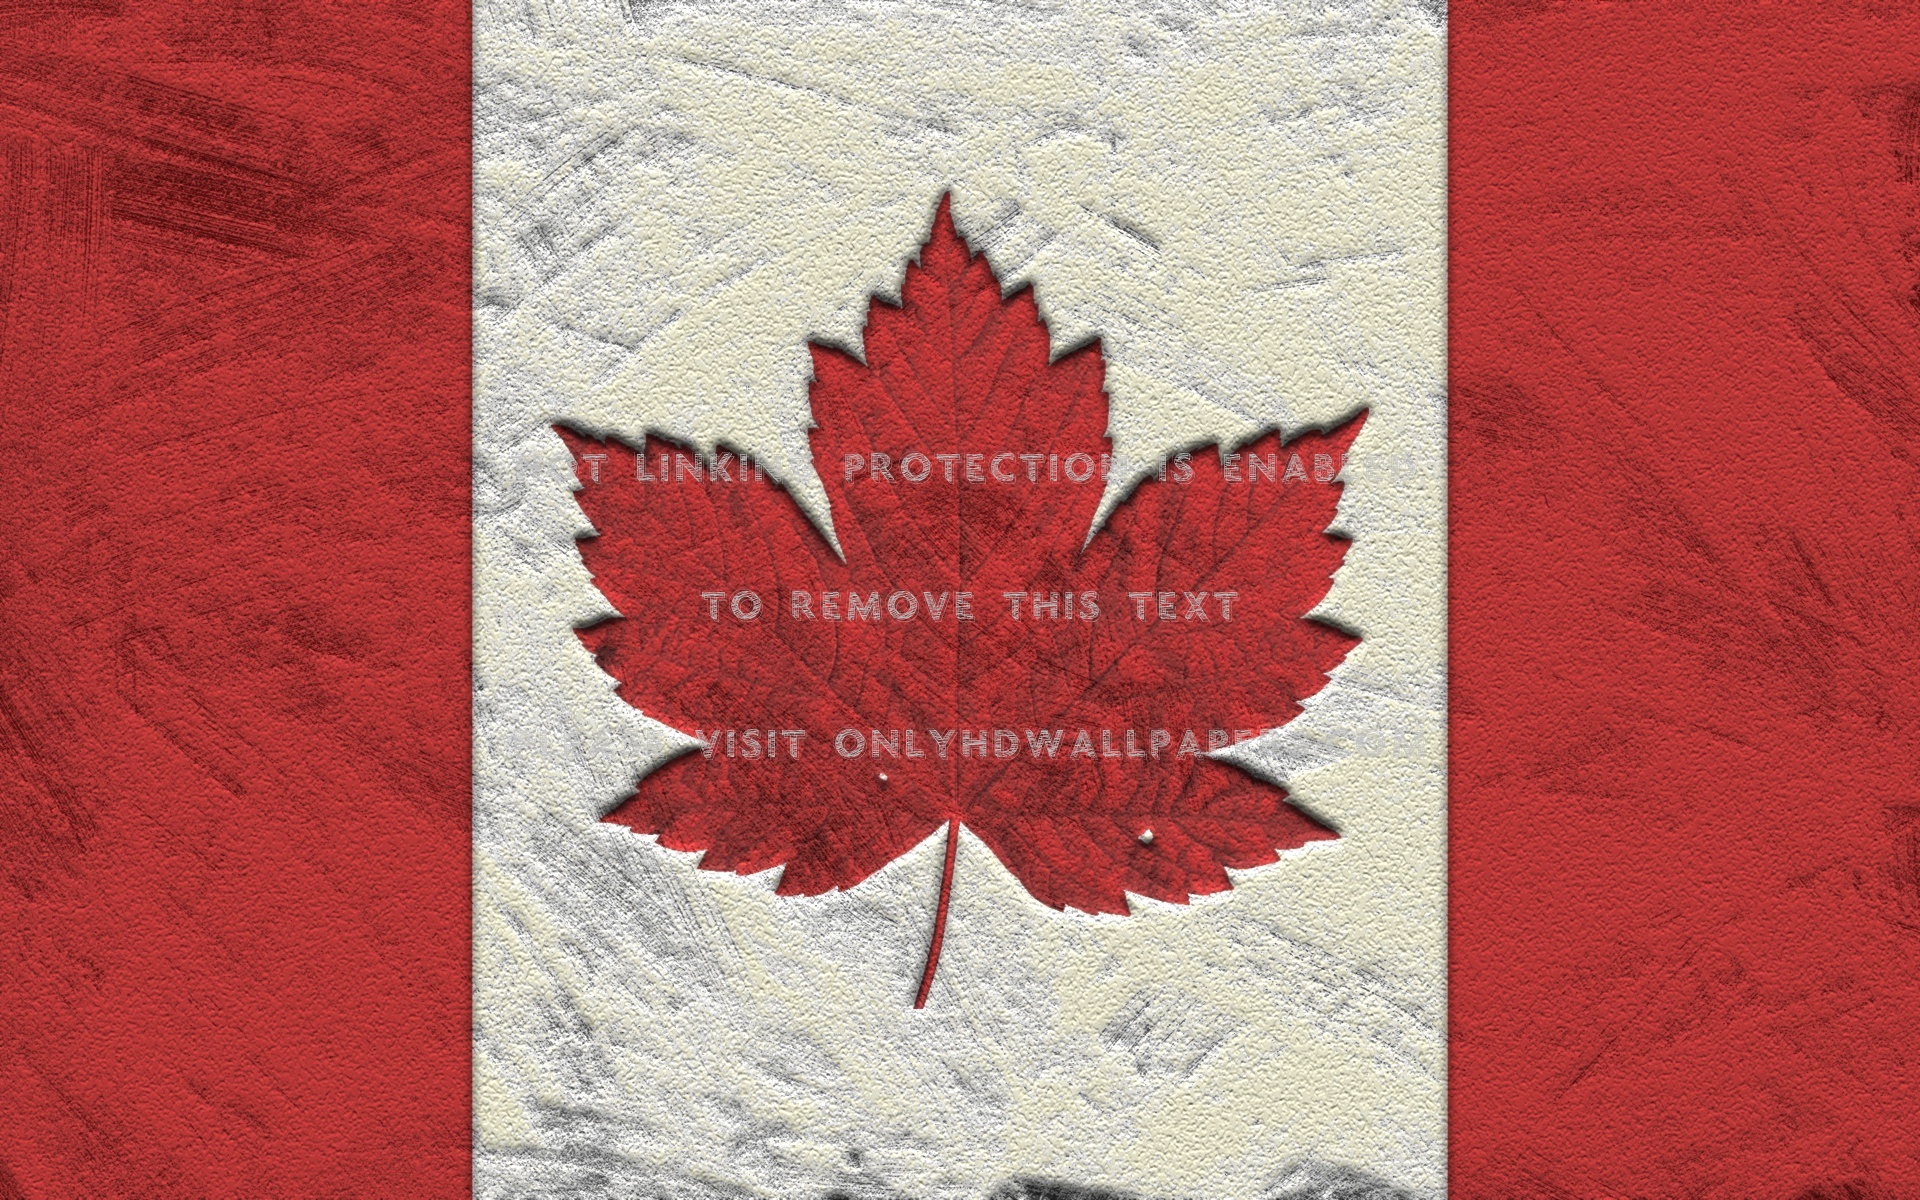 Canada A Just Society , HD Wallpaper & Backgrounds